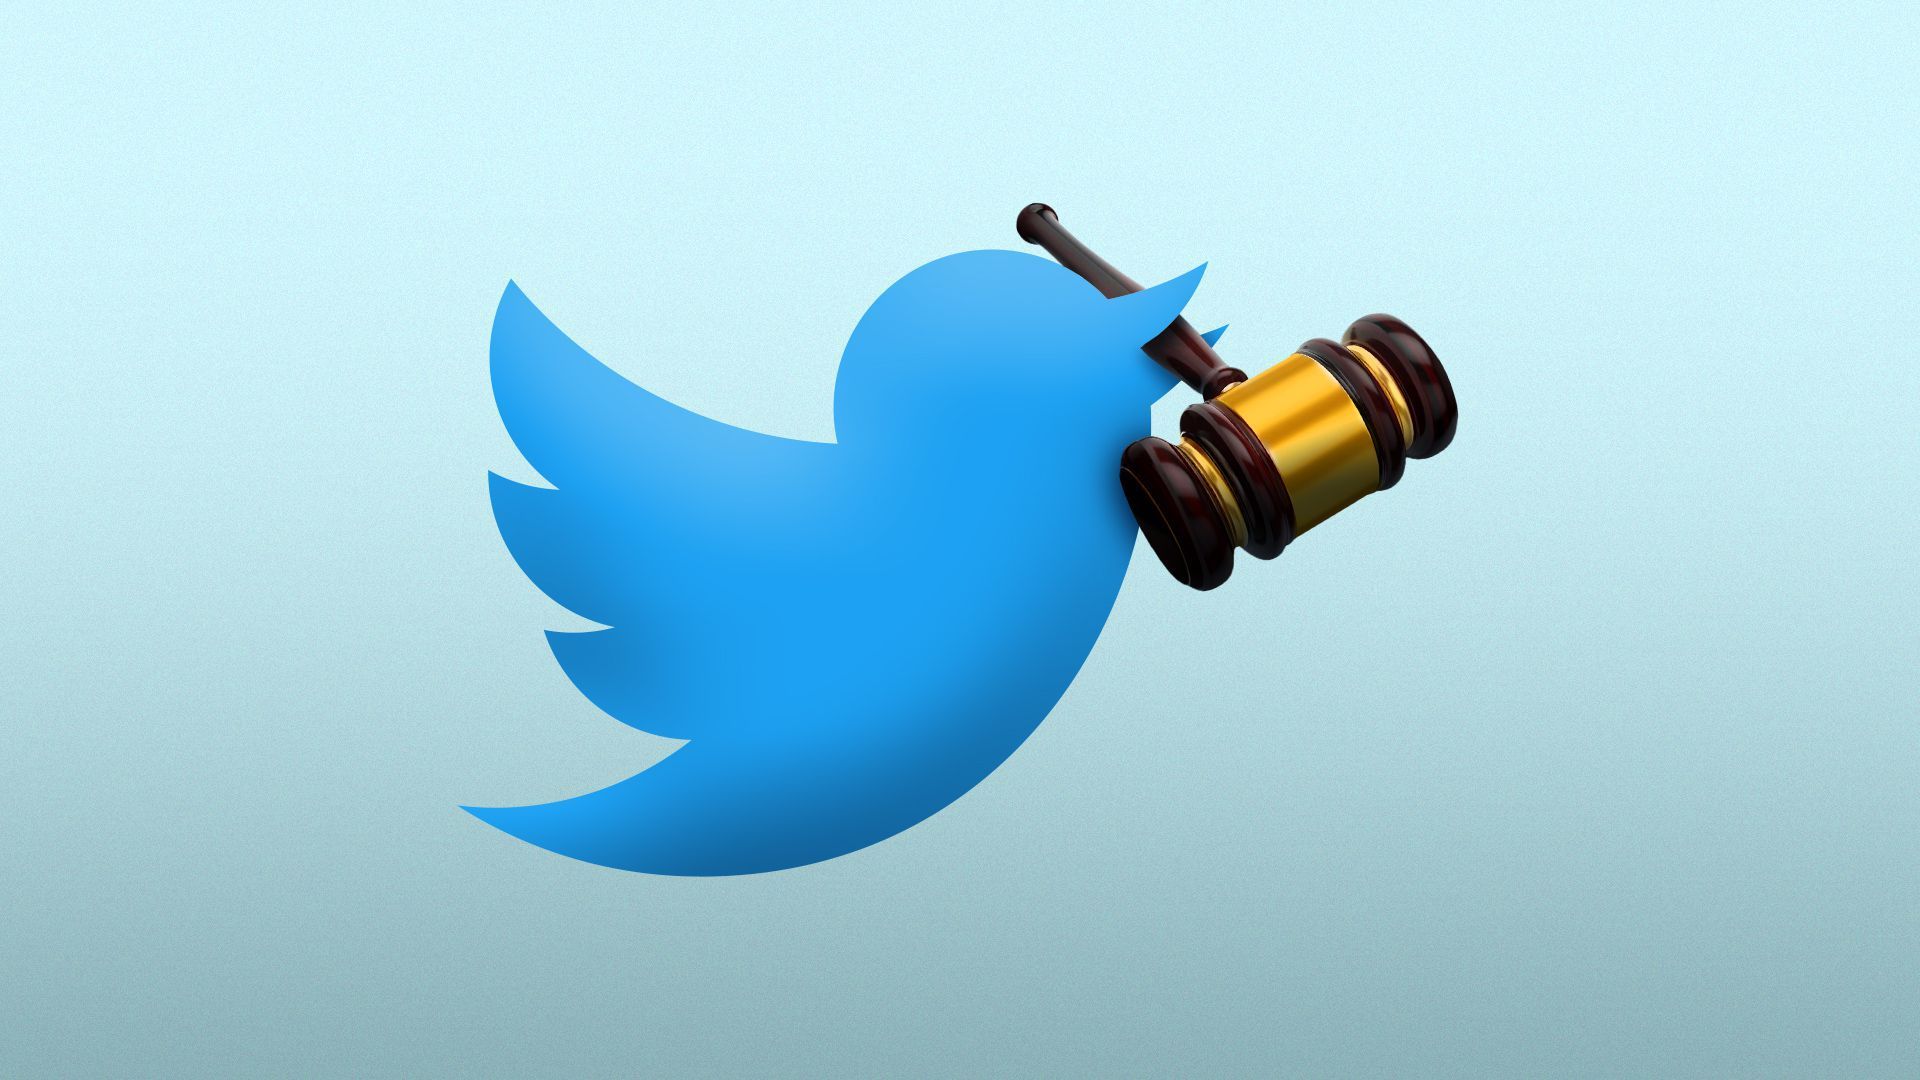 An illustration of a Twitter bird holding a gavel in its mouth